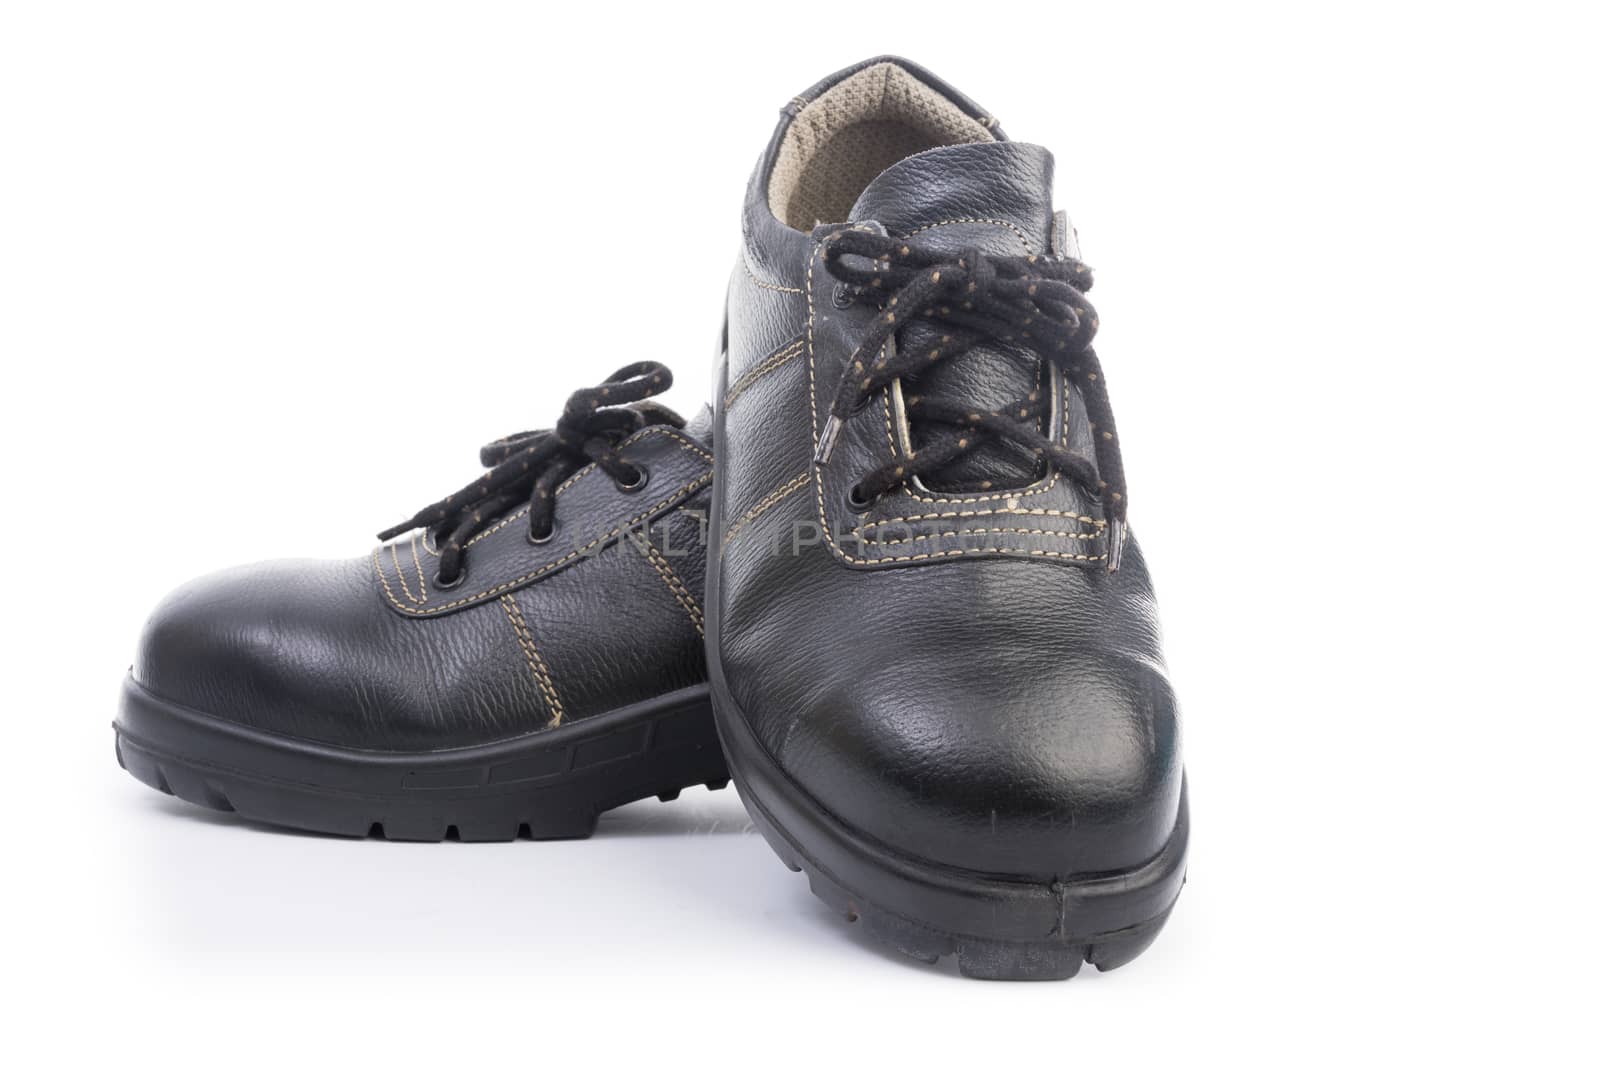 Black Safety Shoe Isolated by Sorapop